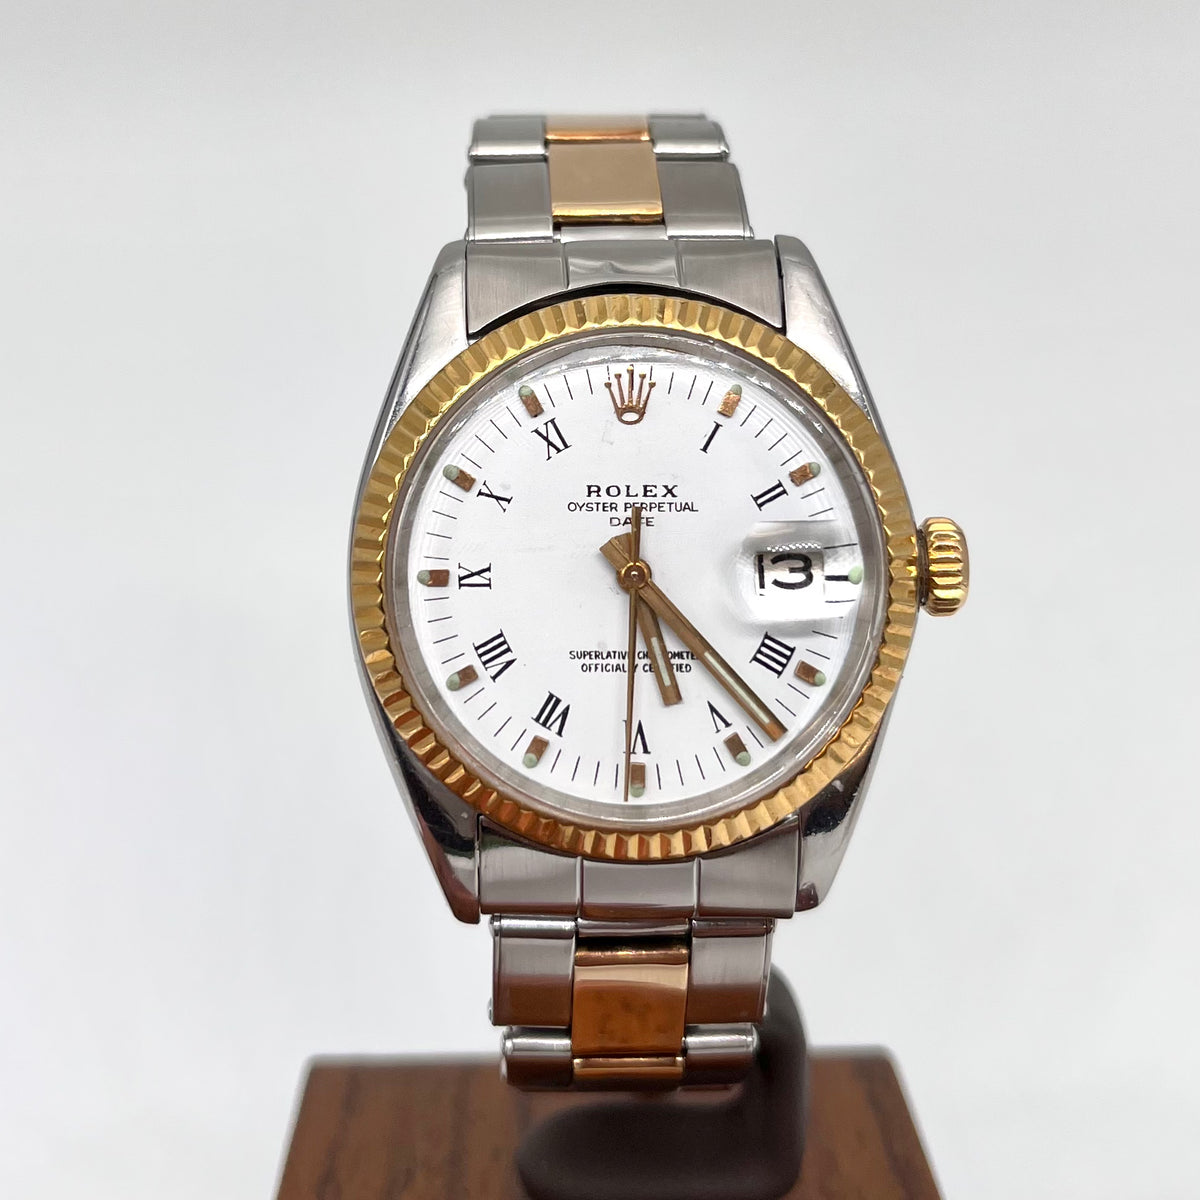 Pre Owned Rolex | Pre Loved Rolex | Pre Owned Rolex Oyster Bracelet | Pre Owned Two Tone Rolex | Unisex Watches | Pre Owned Rolex Dublin | Buy, Sell and Source | Fully Serviced Rolex | Rolex With Guarantee 